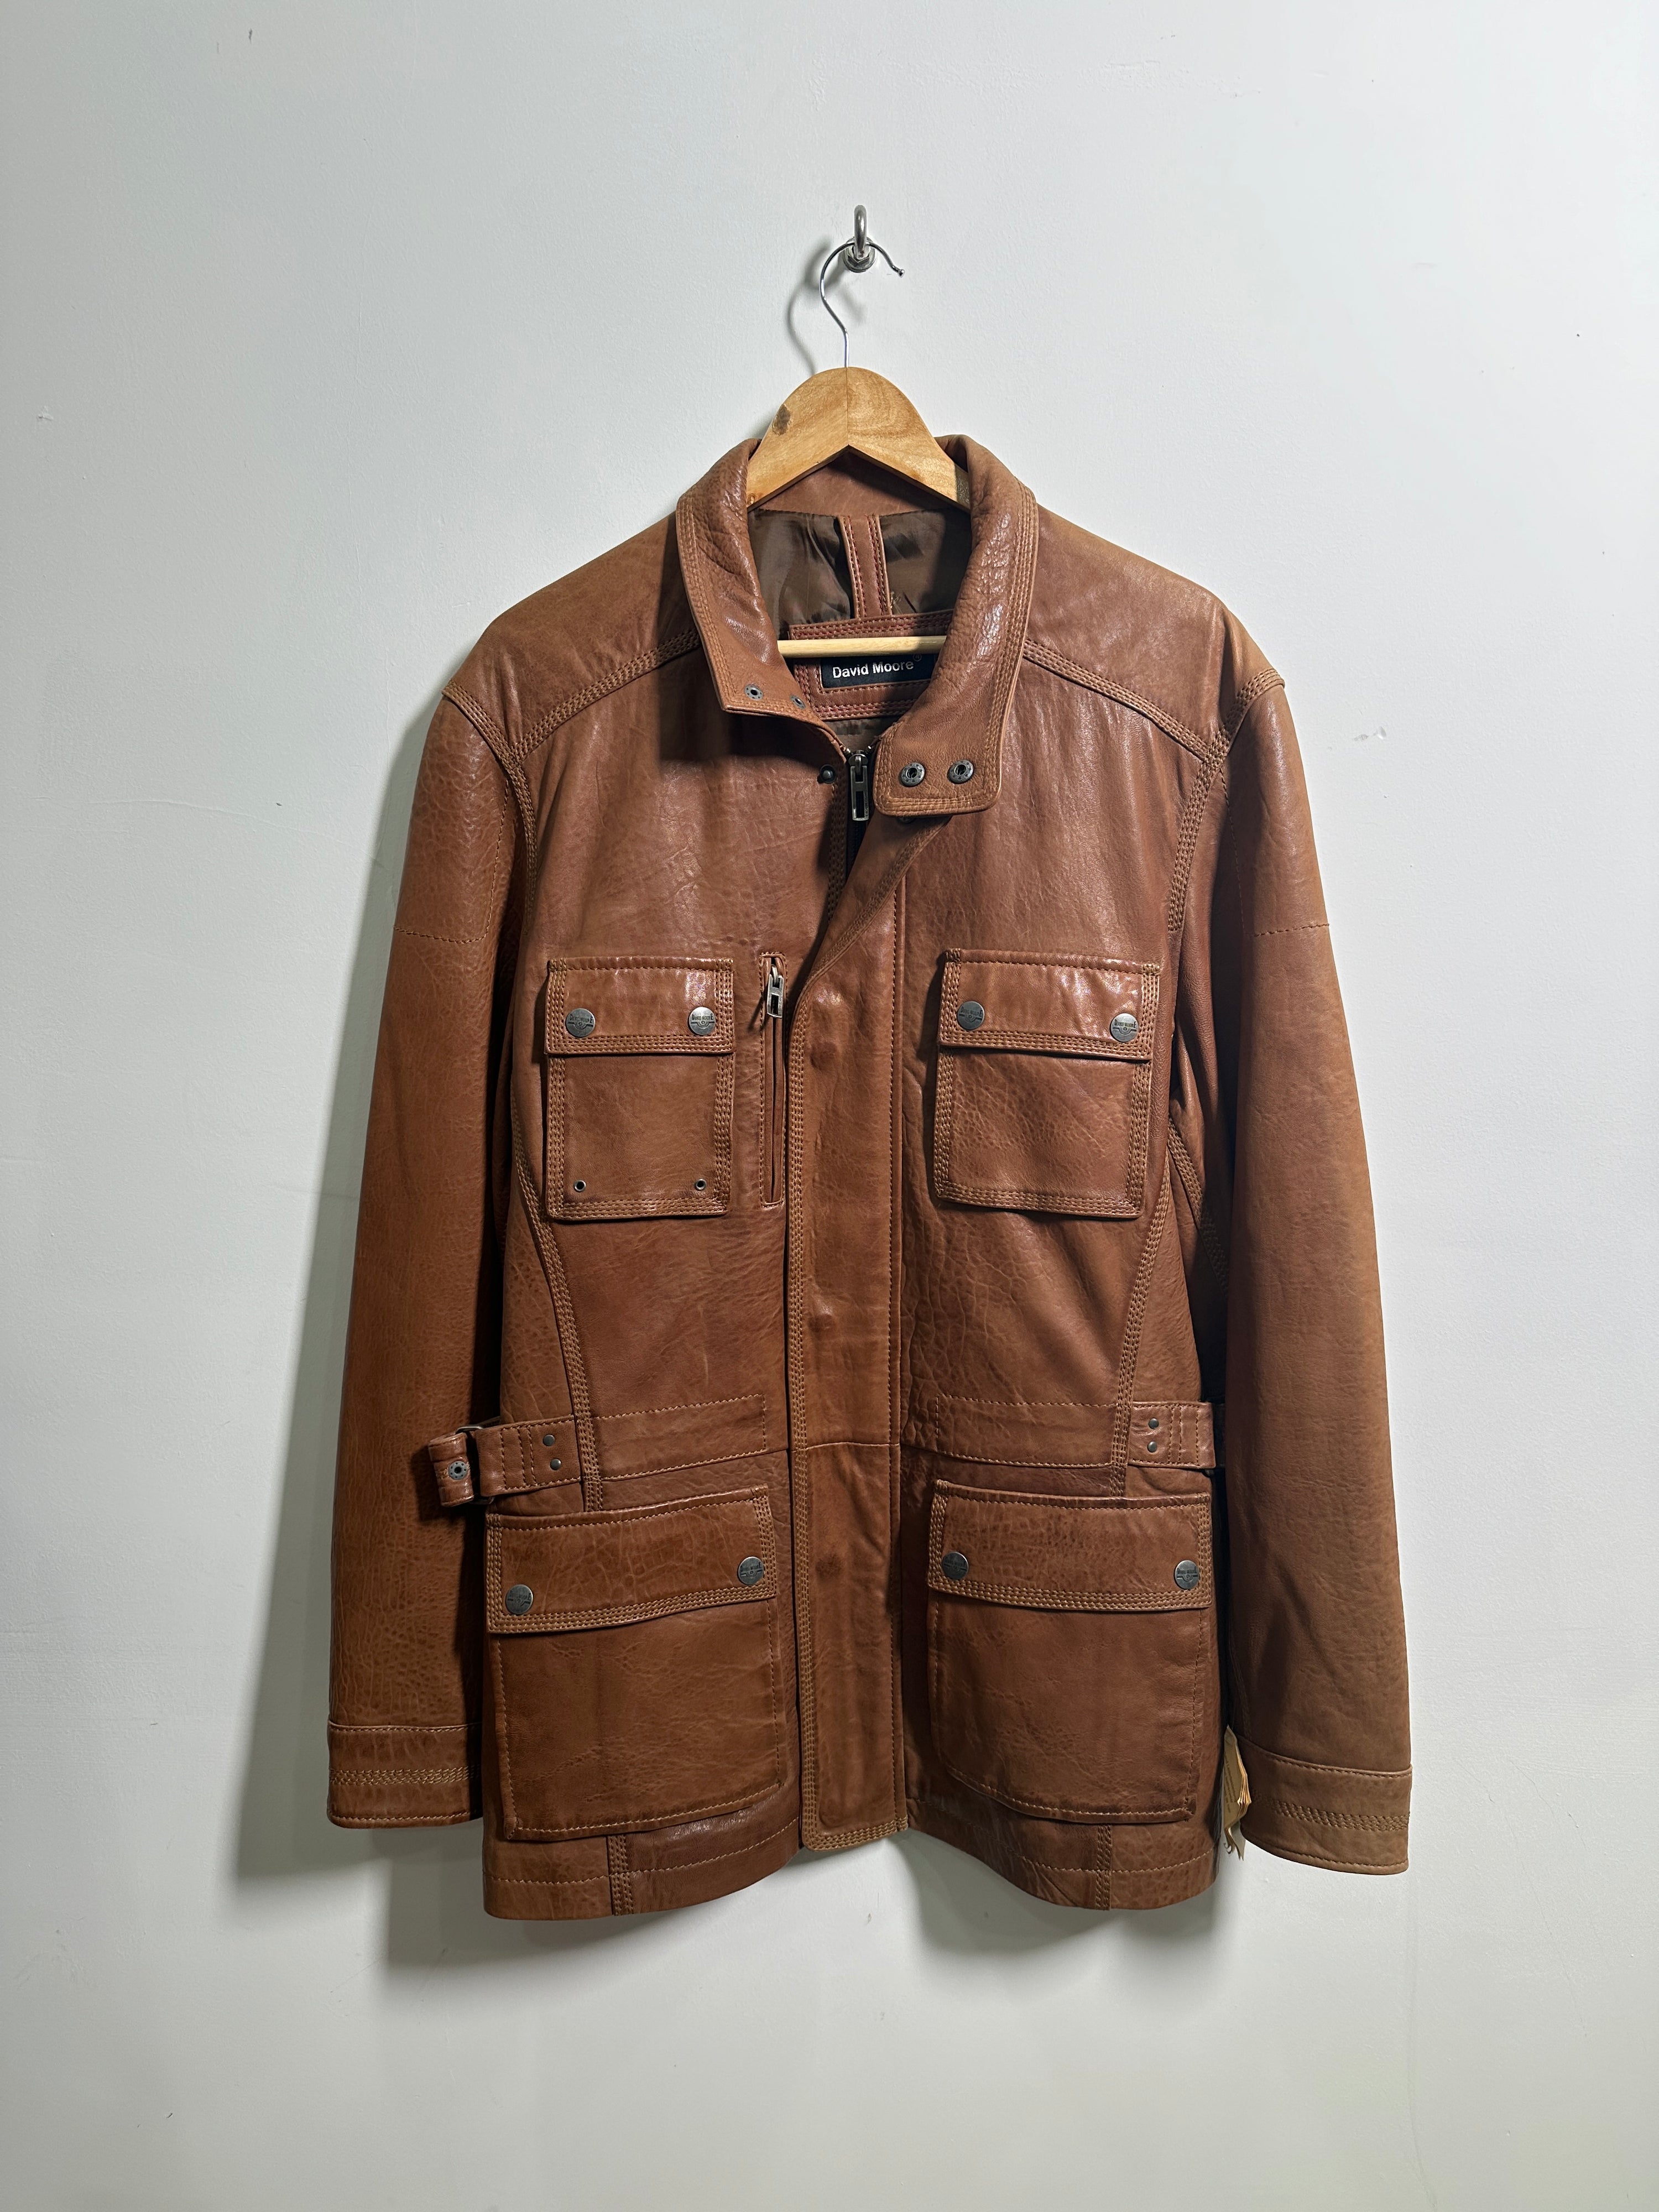 David Moore brown leather coat (new with tags)